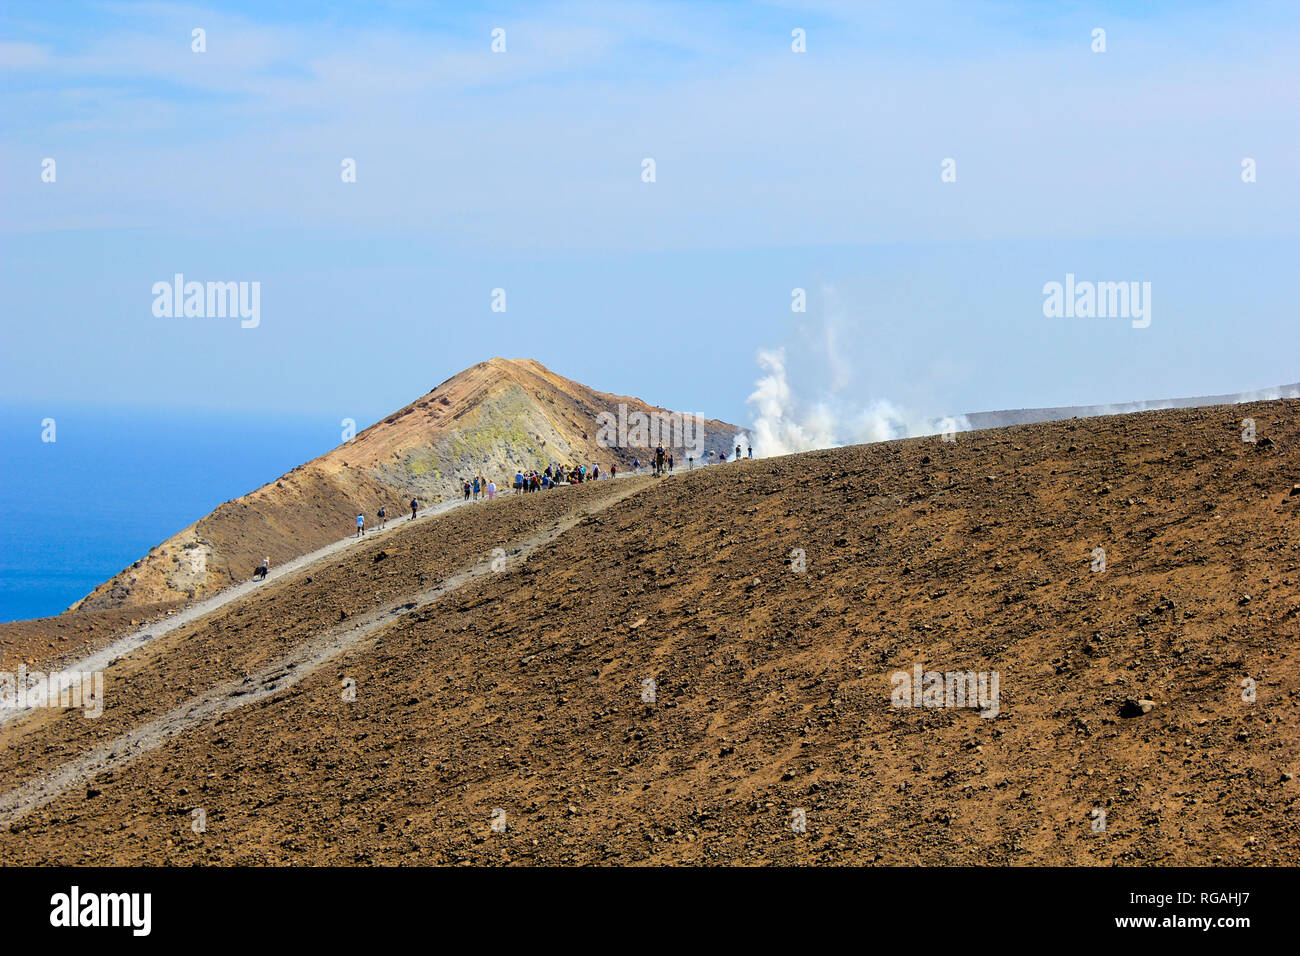 The crater of a volcano at Vulcano Island in Italy attracts tourists with the steams of sulphur. Stock Photo